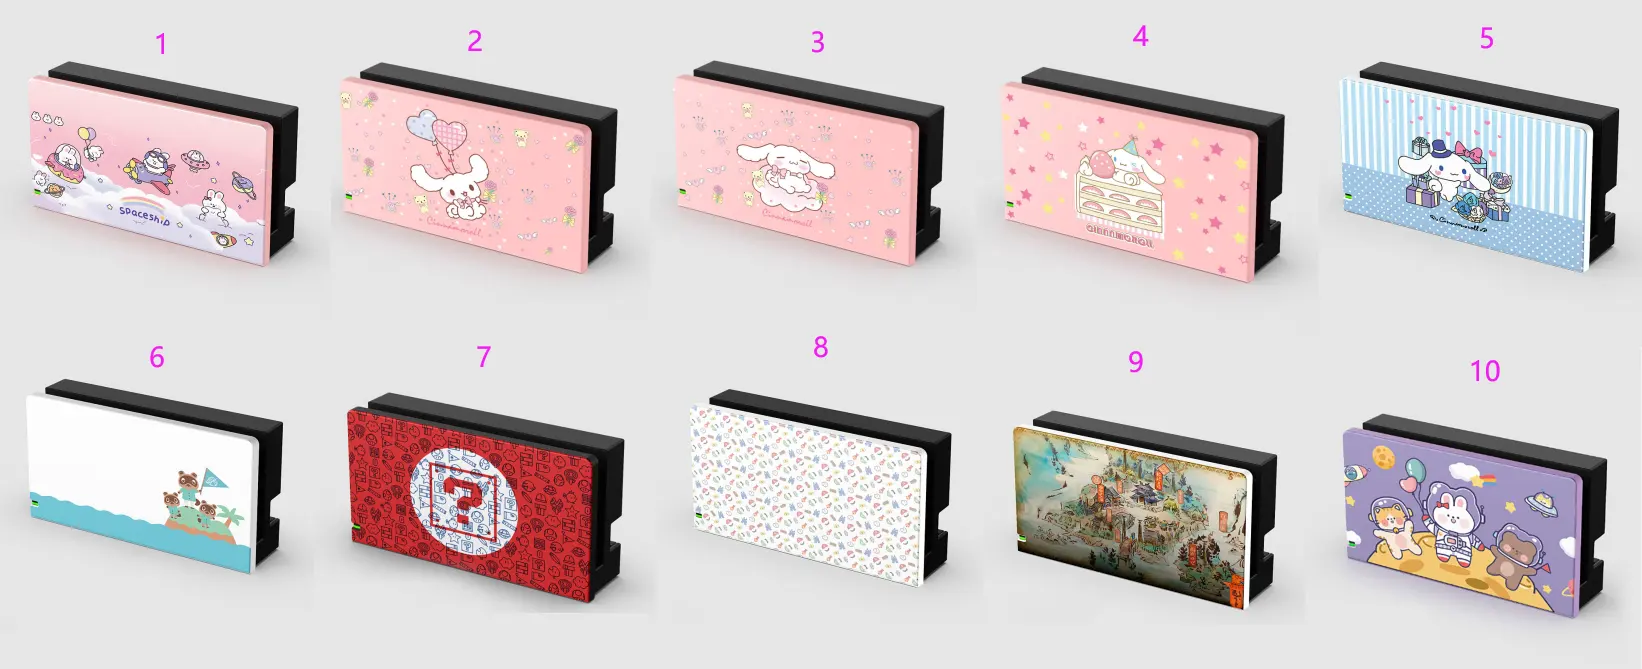 DATA FROG Faceplate Front Protector Case For Nintendo Switch TV Dock Base Cover Replacement Animal Crossing Shell For NS Console